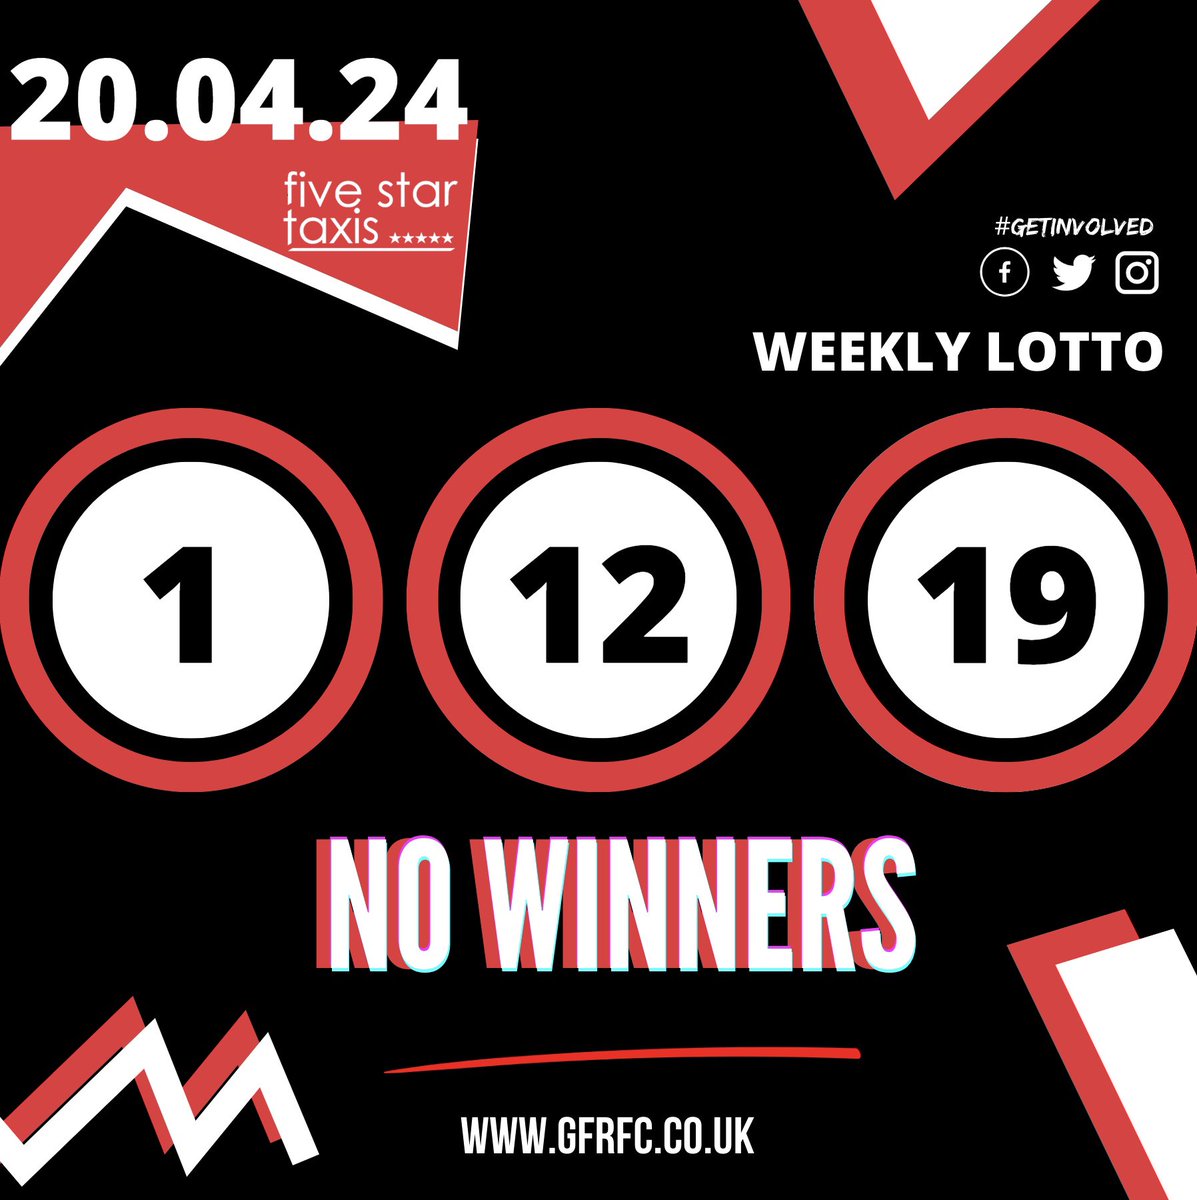 🔺◾️ 𝗪𝗲𝗲𝗸𝗹𝘆 𝗟𝗼𝘁𝘁𝗼 ◾️🔺 🎰 1 - 12 - 19 ❌ No winners 🤩 Next estimated prize £900 🎟 get your tickets from the bar or - ▶️ PLAY NOW online- clubforce.com/clubs/gala-fai… 🎰 Drawn Saturday Night #GETINVOLVED ❤️⚫️